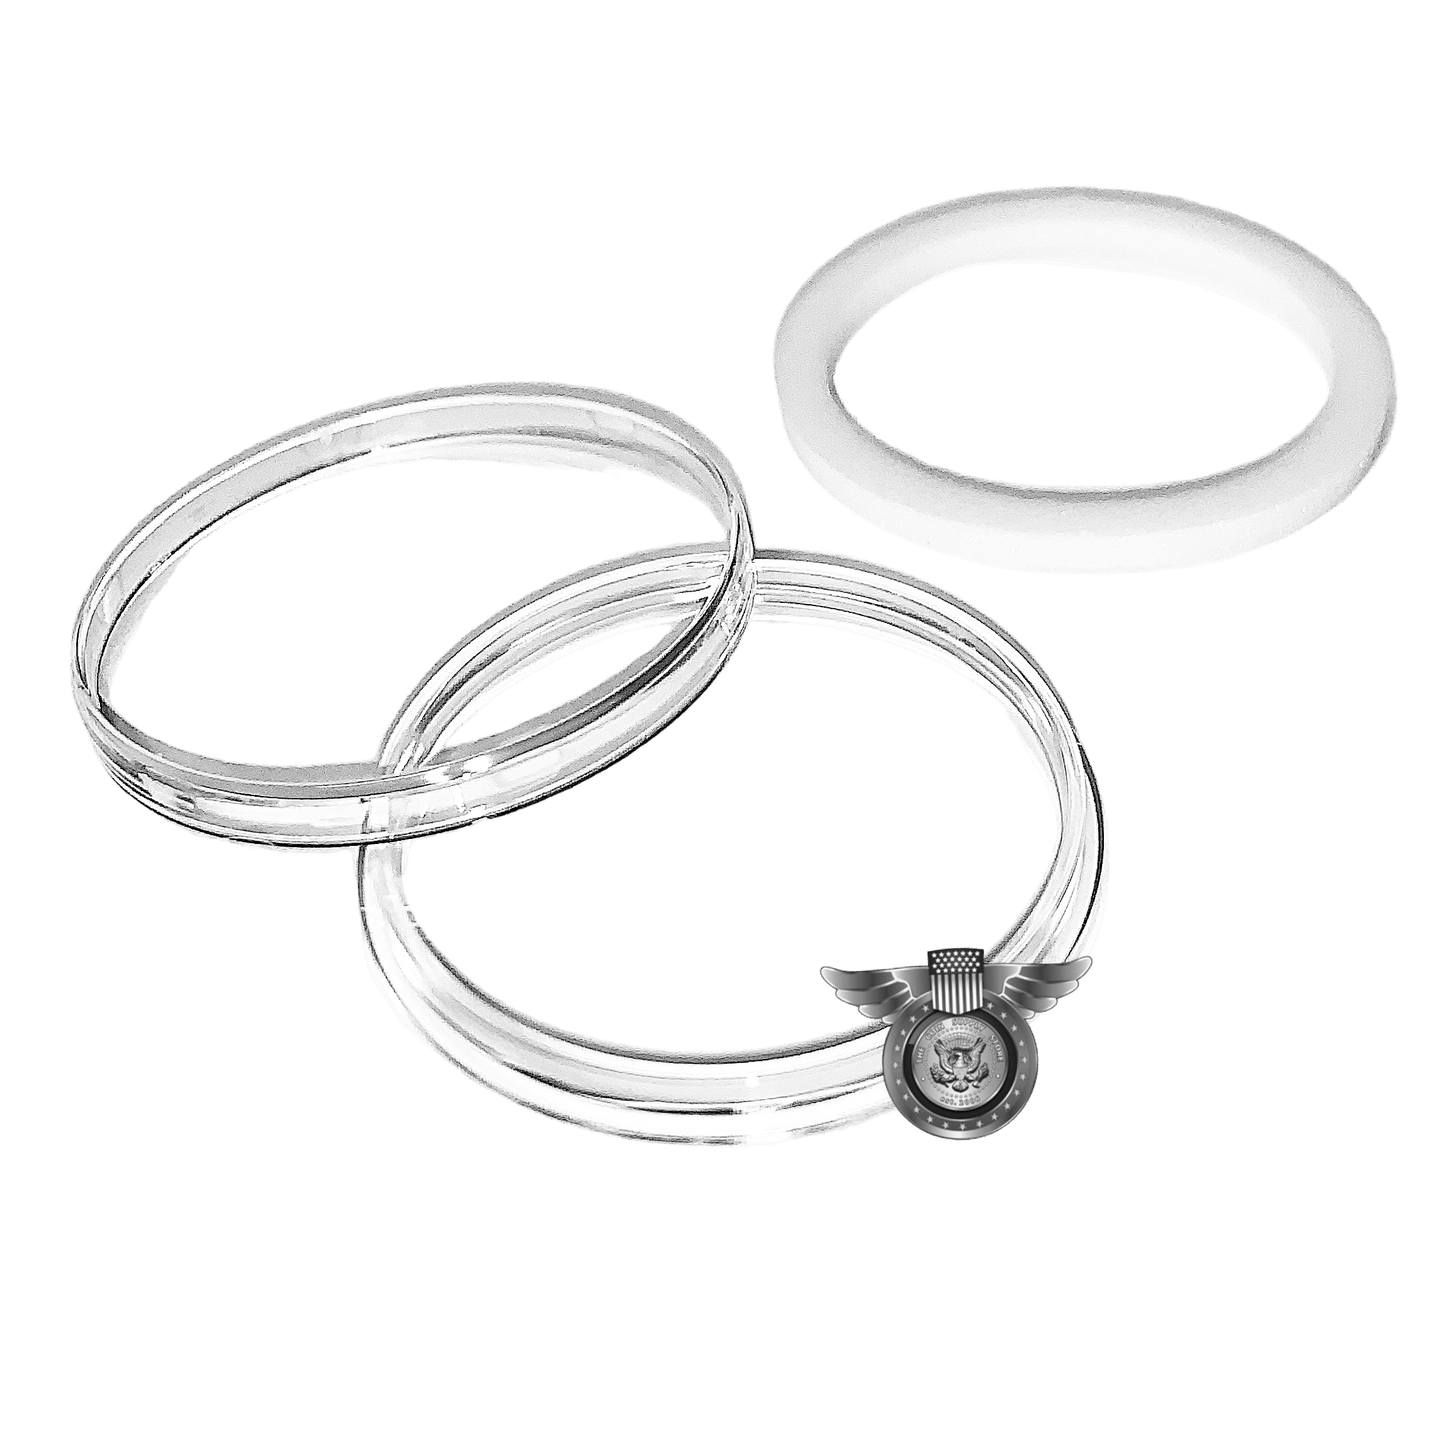 Ring Type Air-Tite Model A - 13mm White